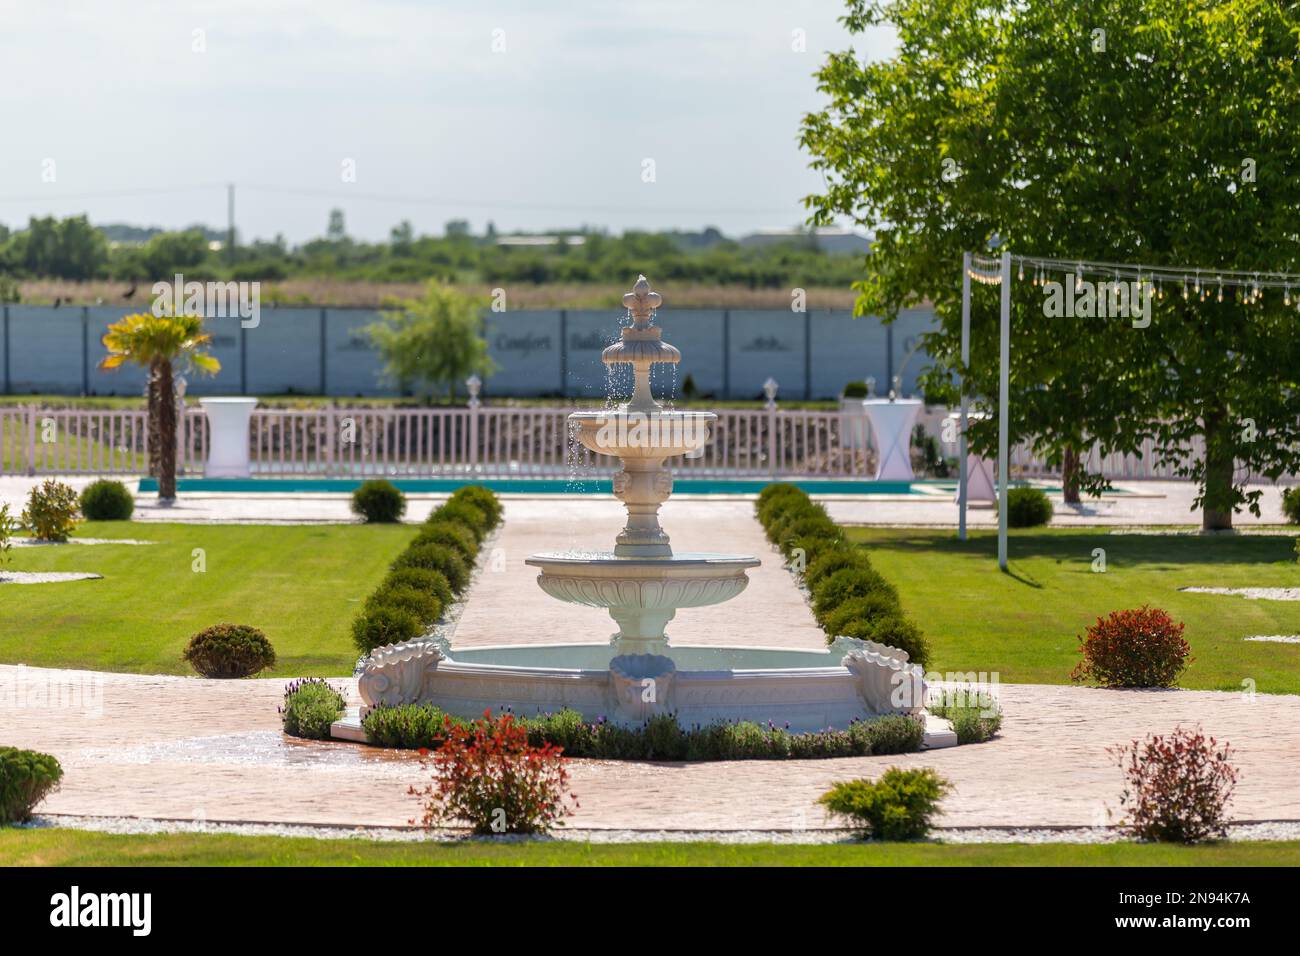 A view of the yard with water fountain and green nature. Stock Photo